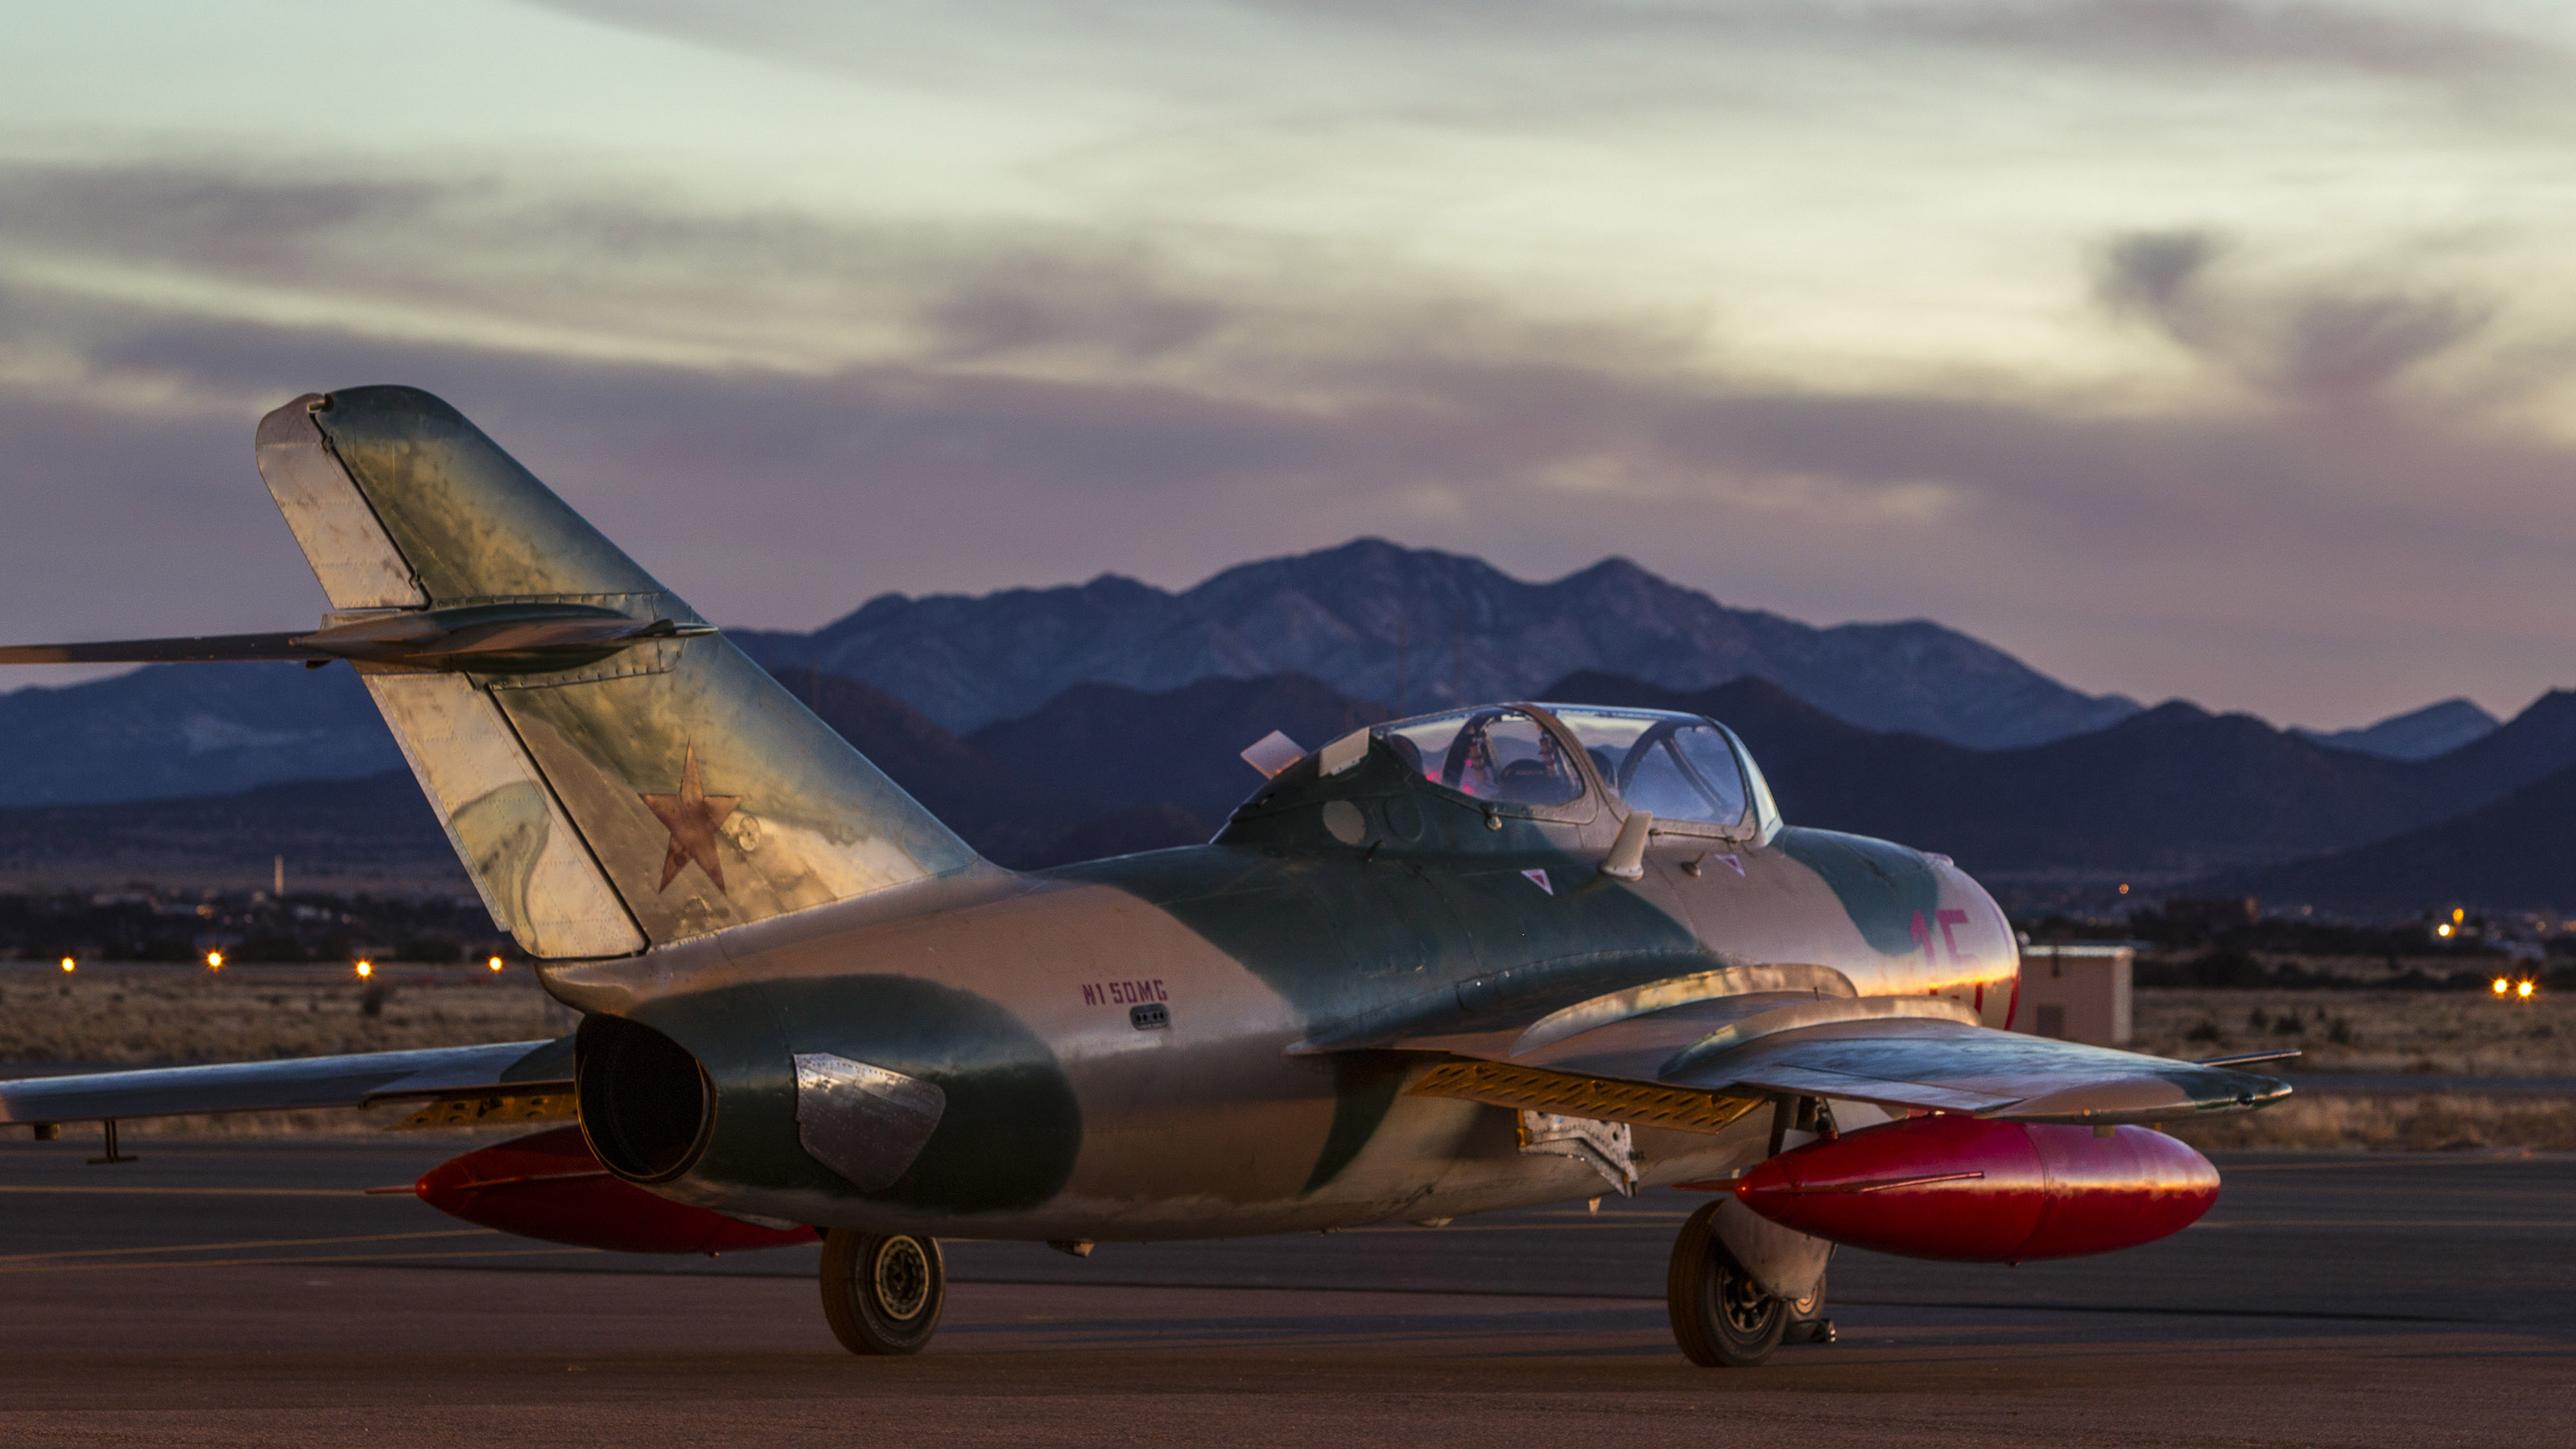 Santa Fe, New Mexico, is home of the Jet Warbird Training Center. The area offers beautiful mountain views.